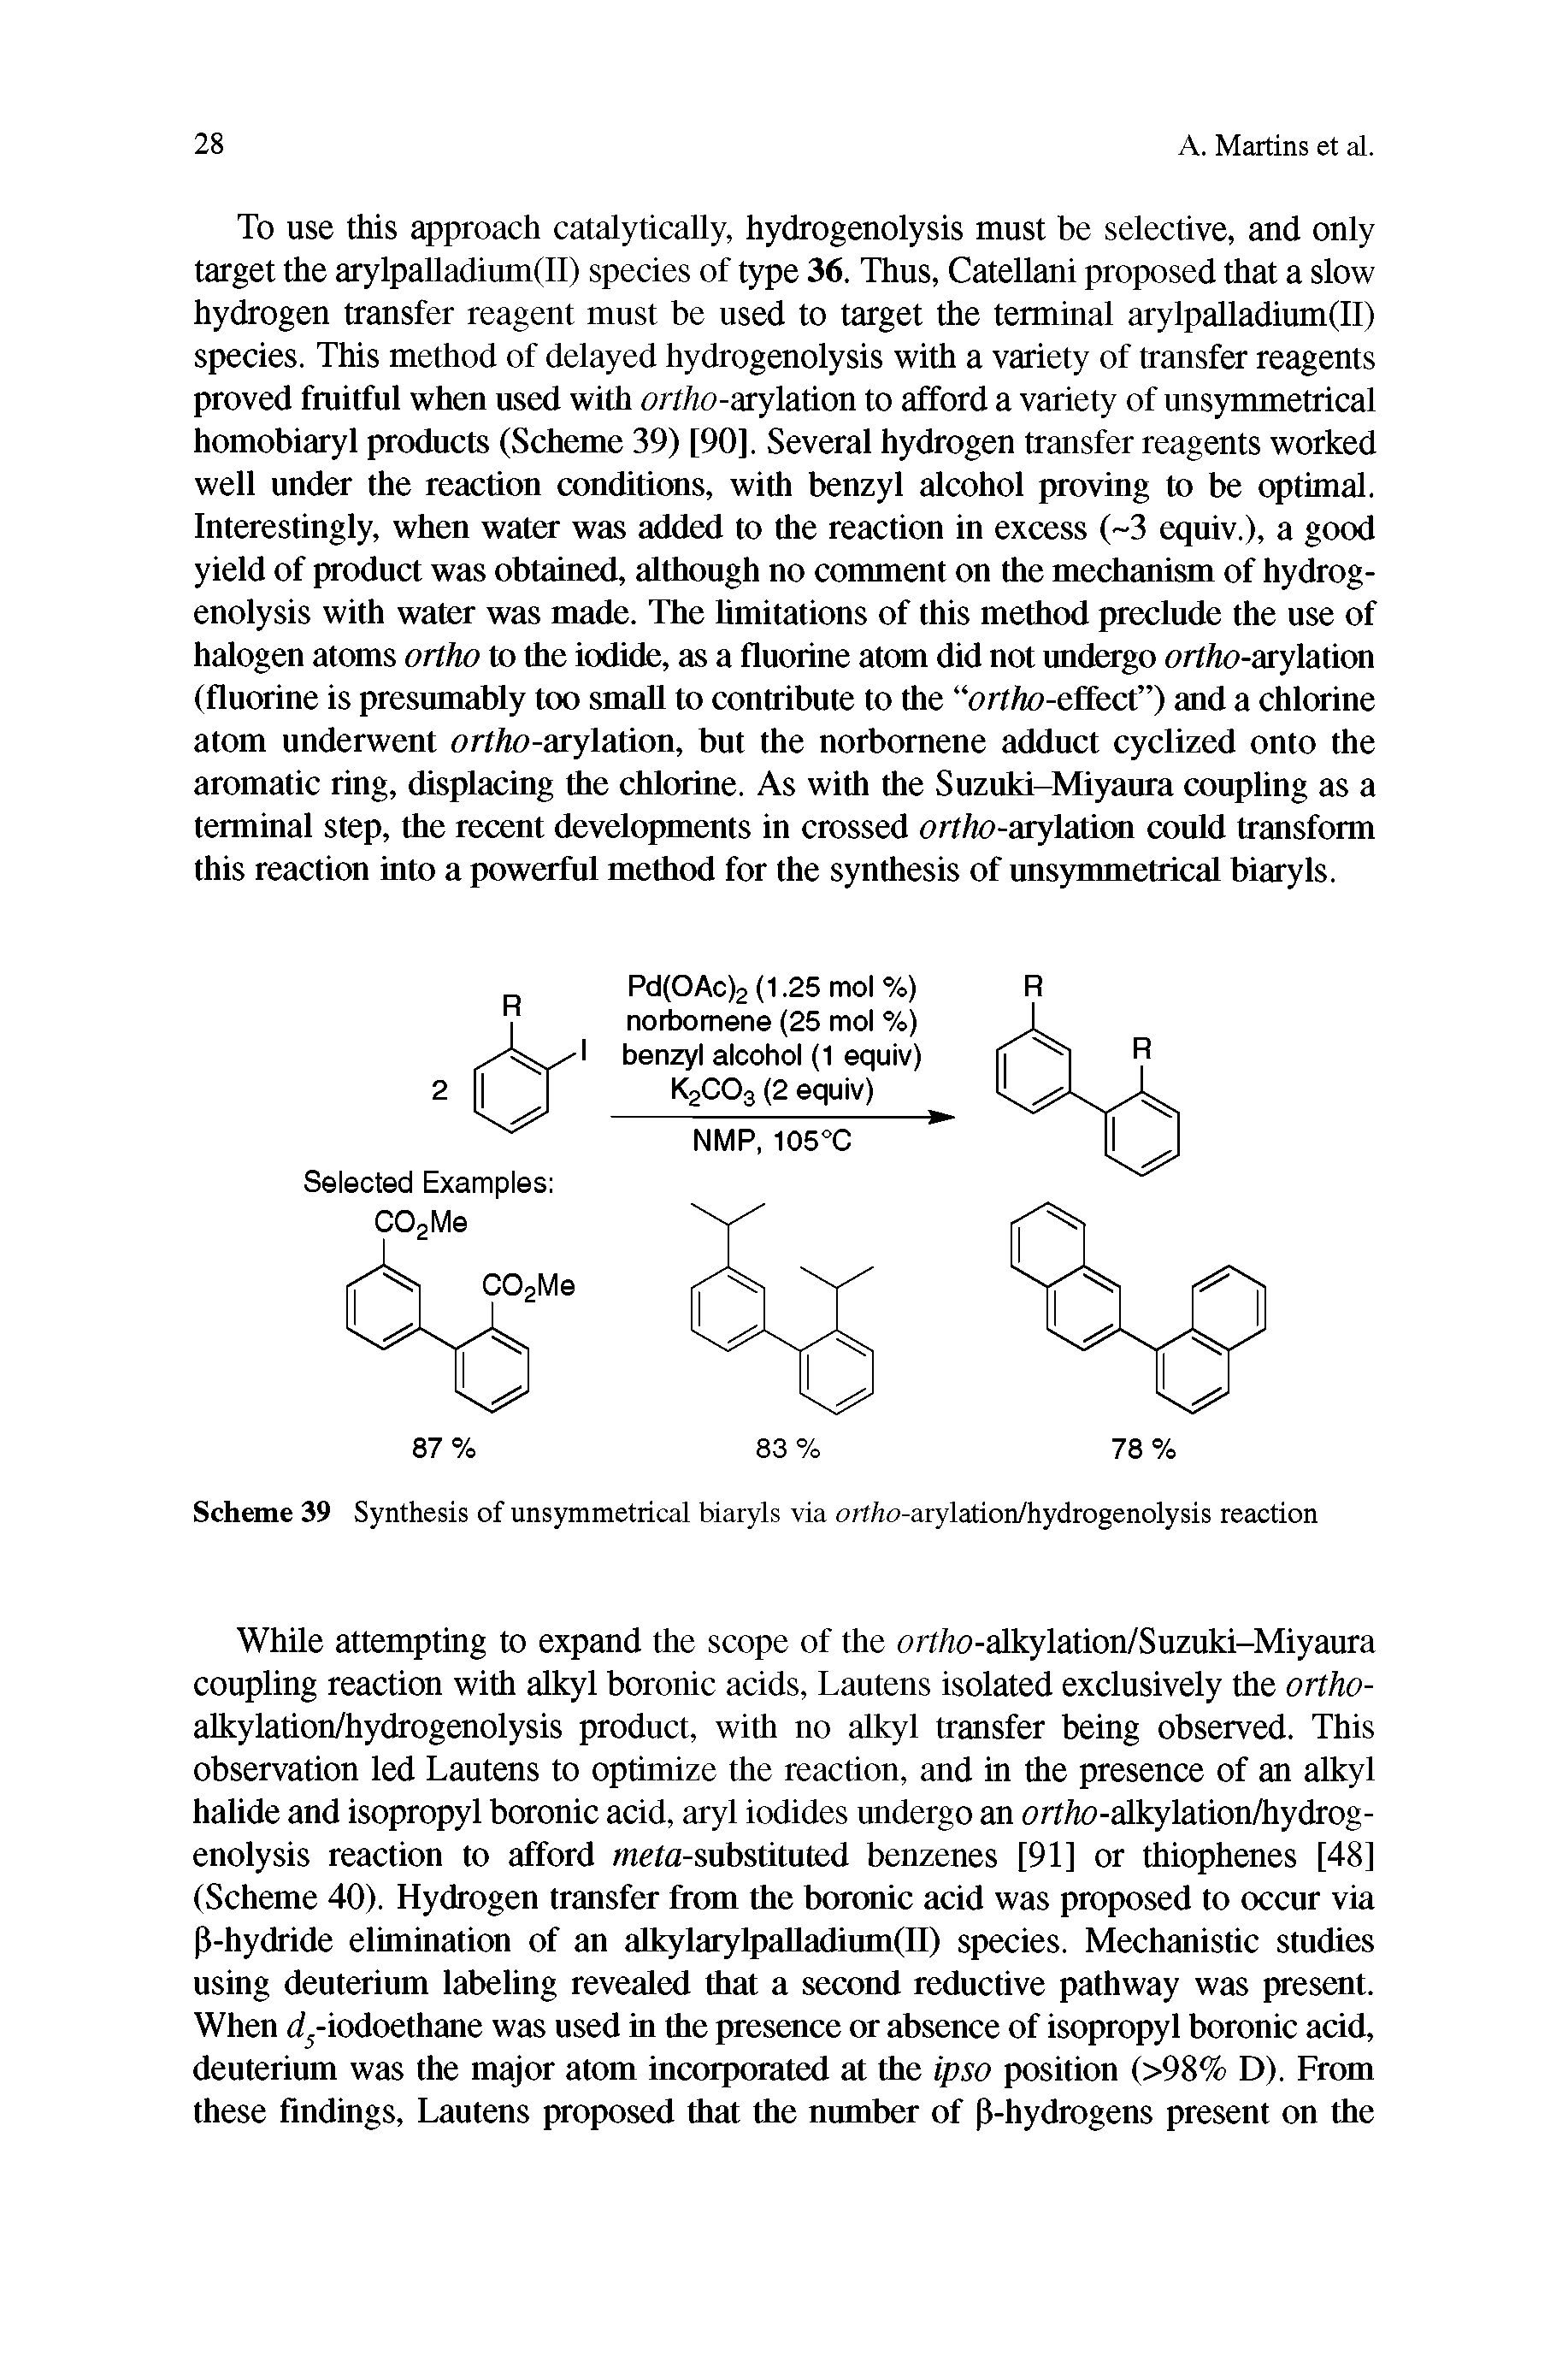 Scheme 39 Synthesis of unsymmetrical biaryls via ort/ro-arylation/hydrogenolysis reaction...